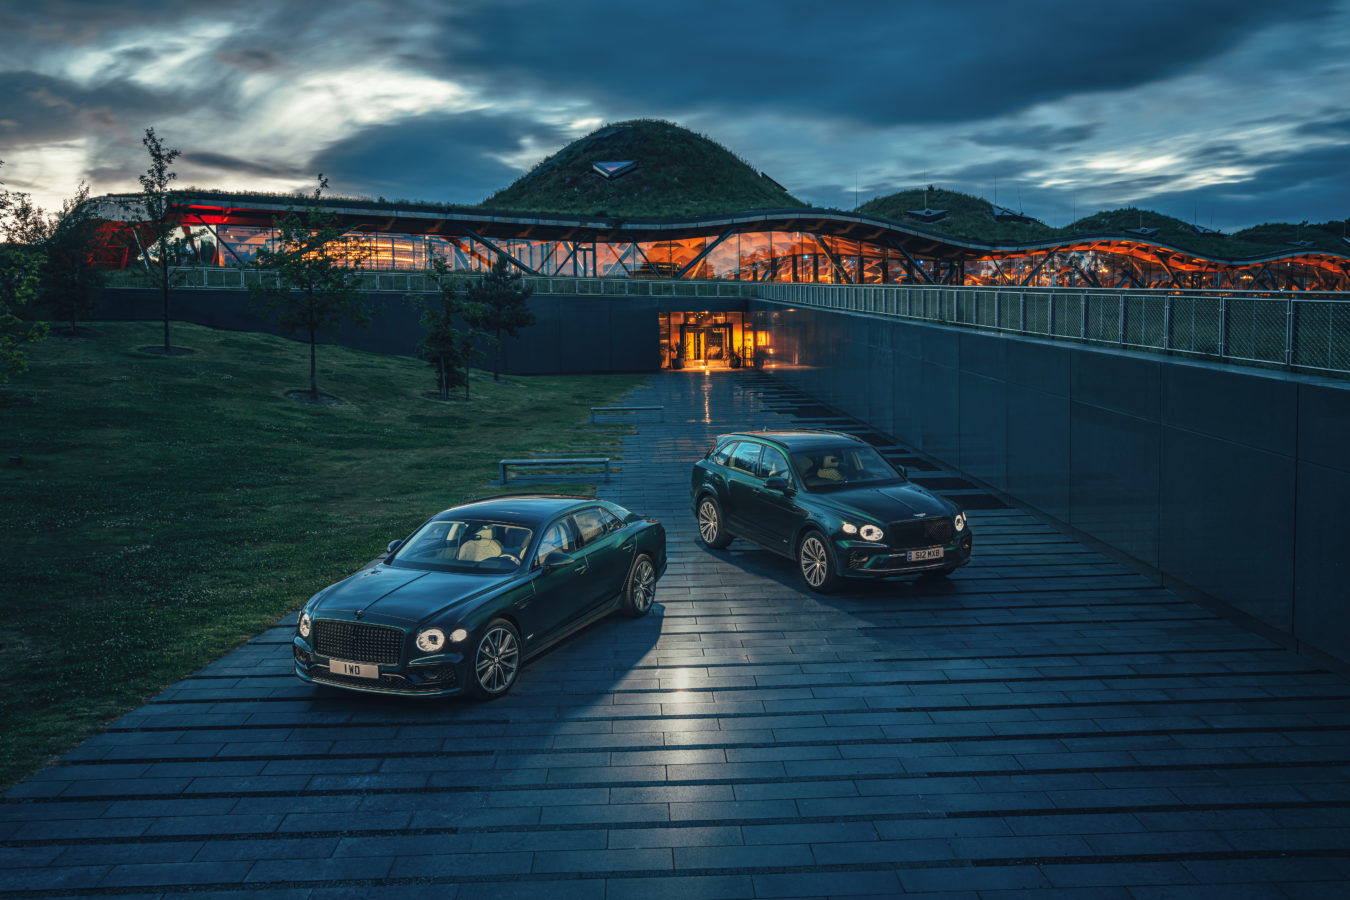 Moving Forward into a Sustainable Future Through the ‘Macallan x Bentley’ Global Partnership